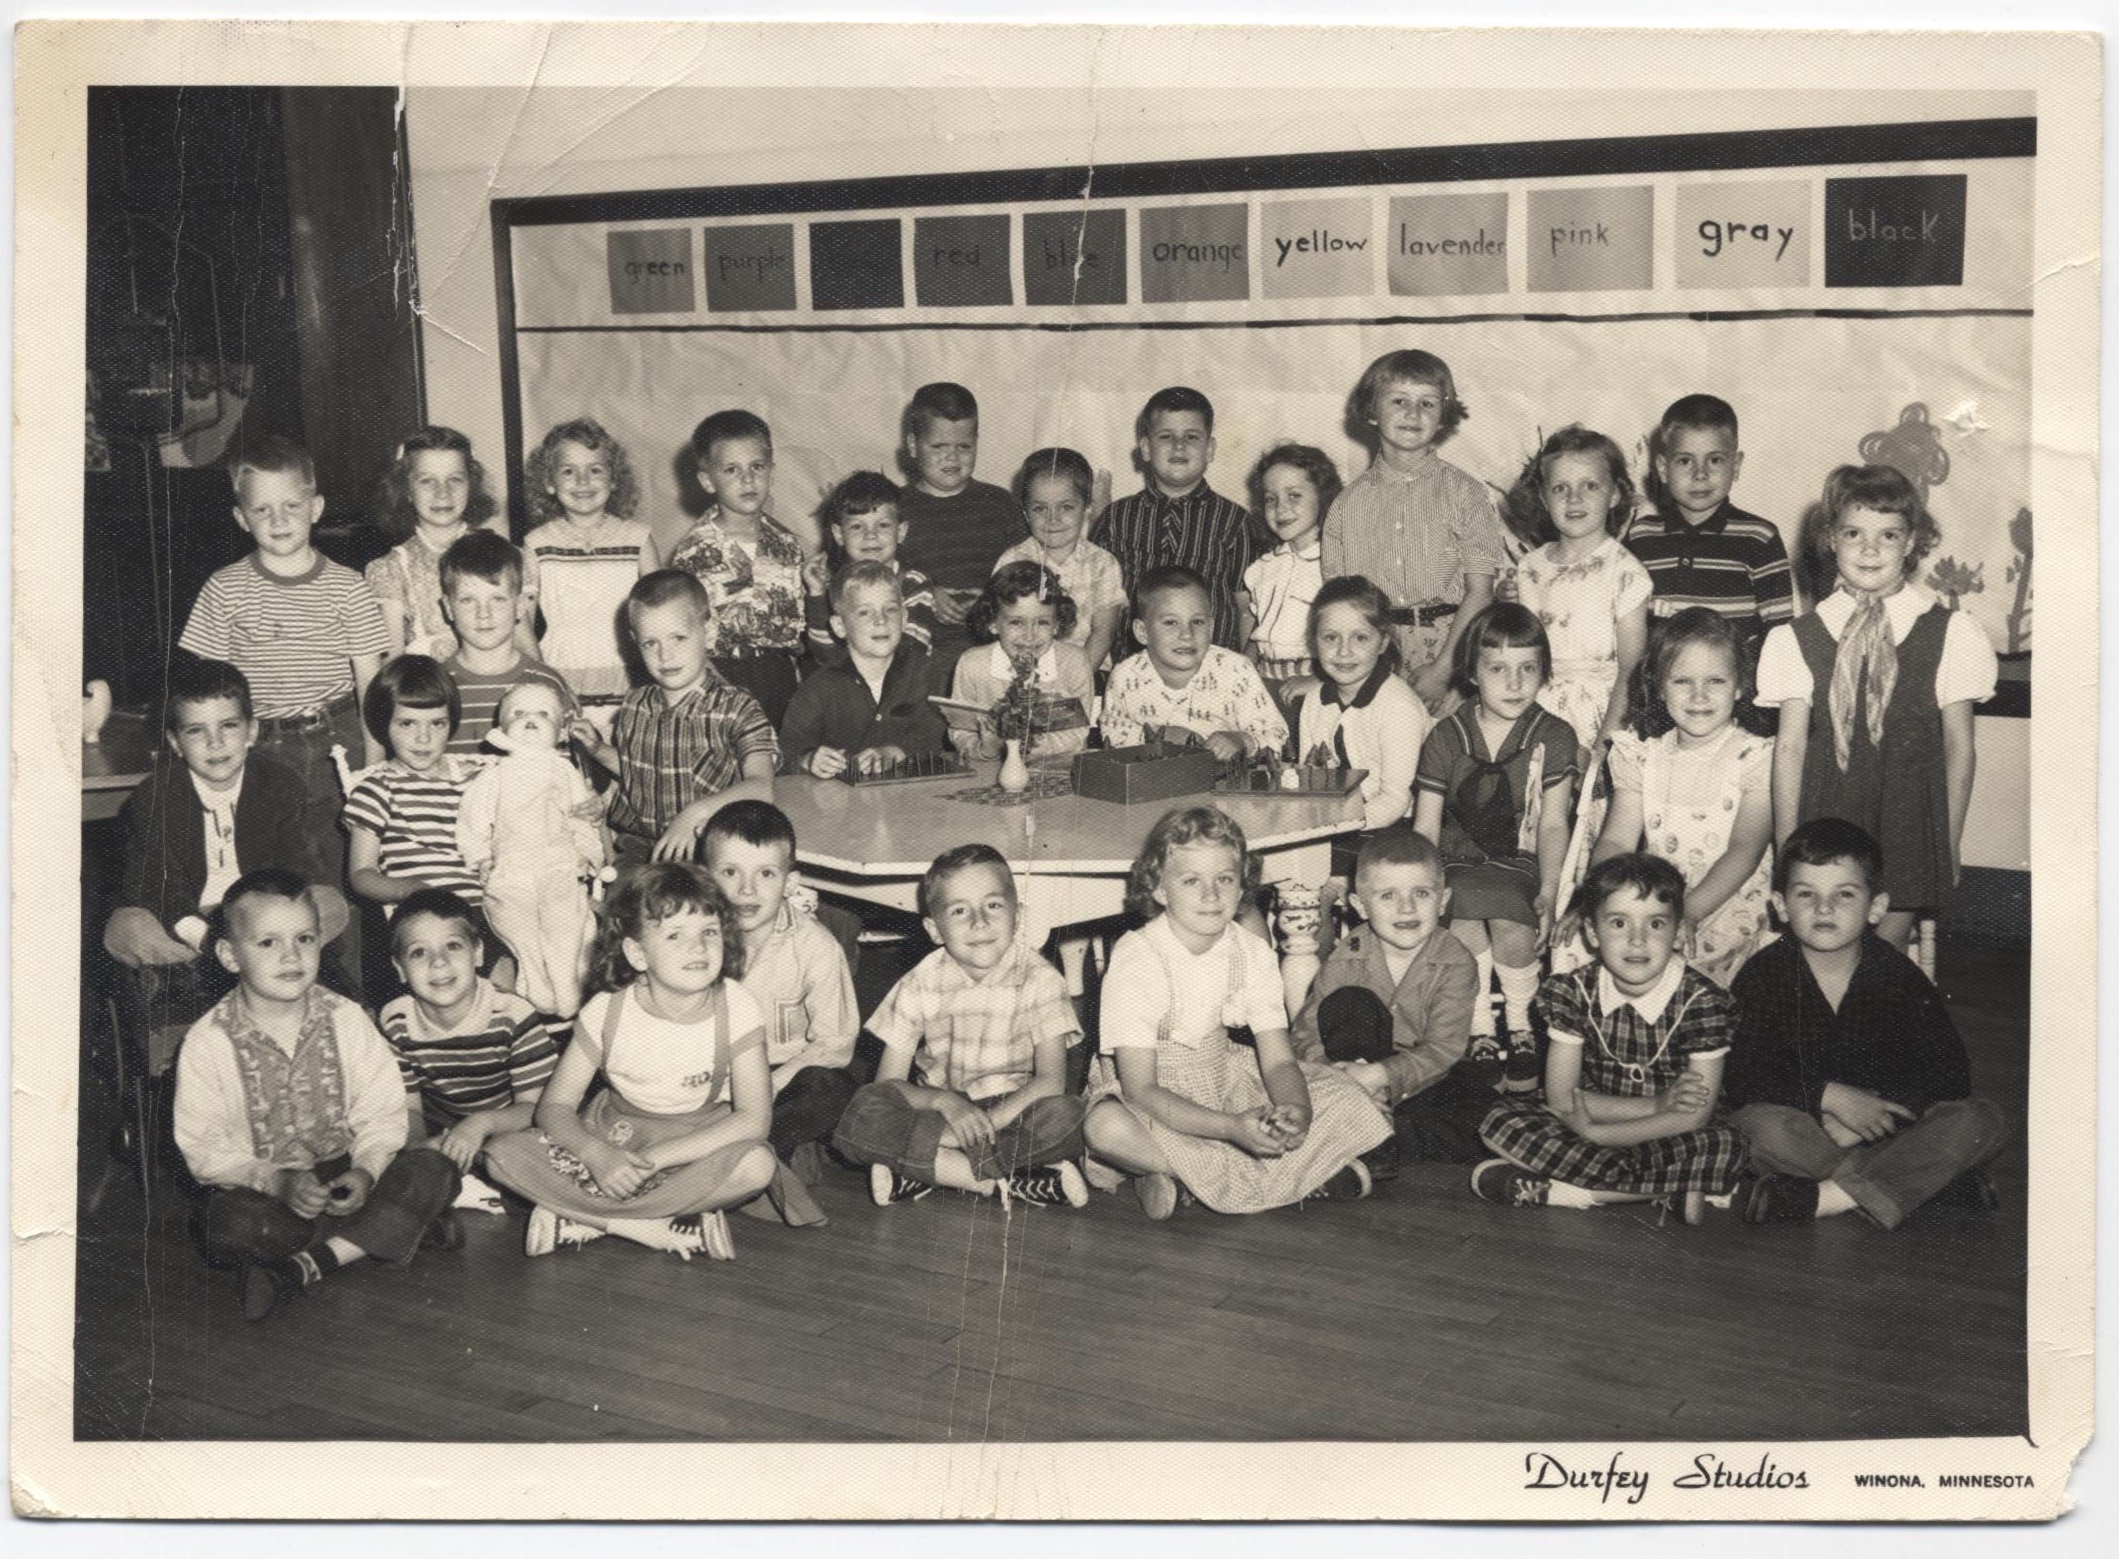 I can identify many of the kids in the photo.  Can you?!?!?!
Madison Elementary School Kindergarten
1957 Miss Fran Kinsie
